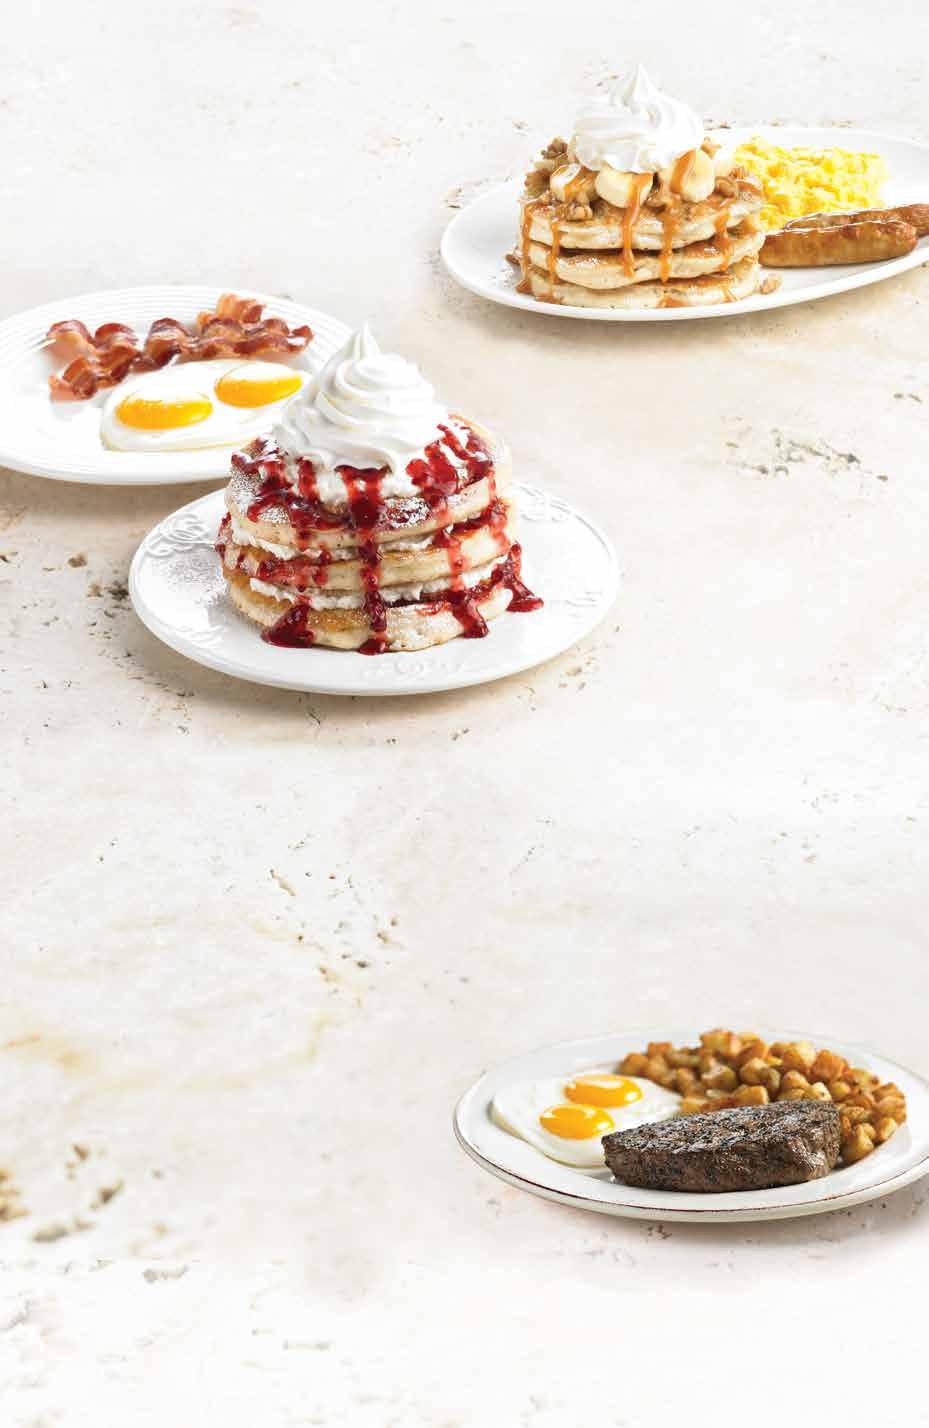 Better Make breakfast a special occasion! Unique combinations featuring premium ingredients is a better way to start the day!